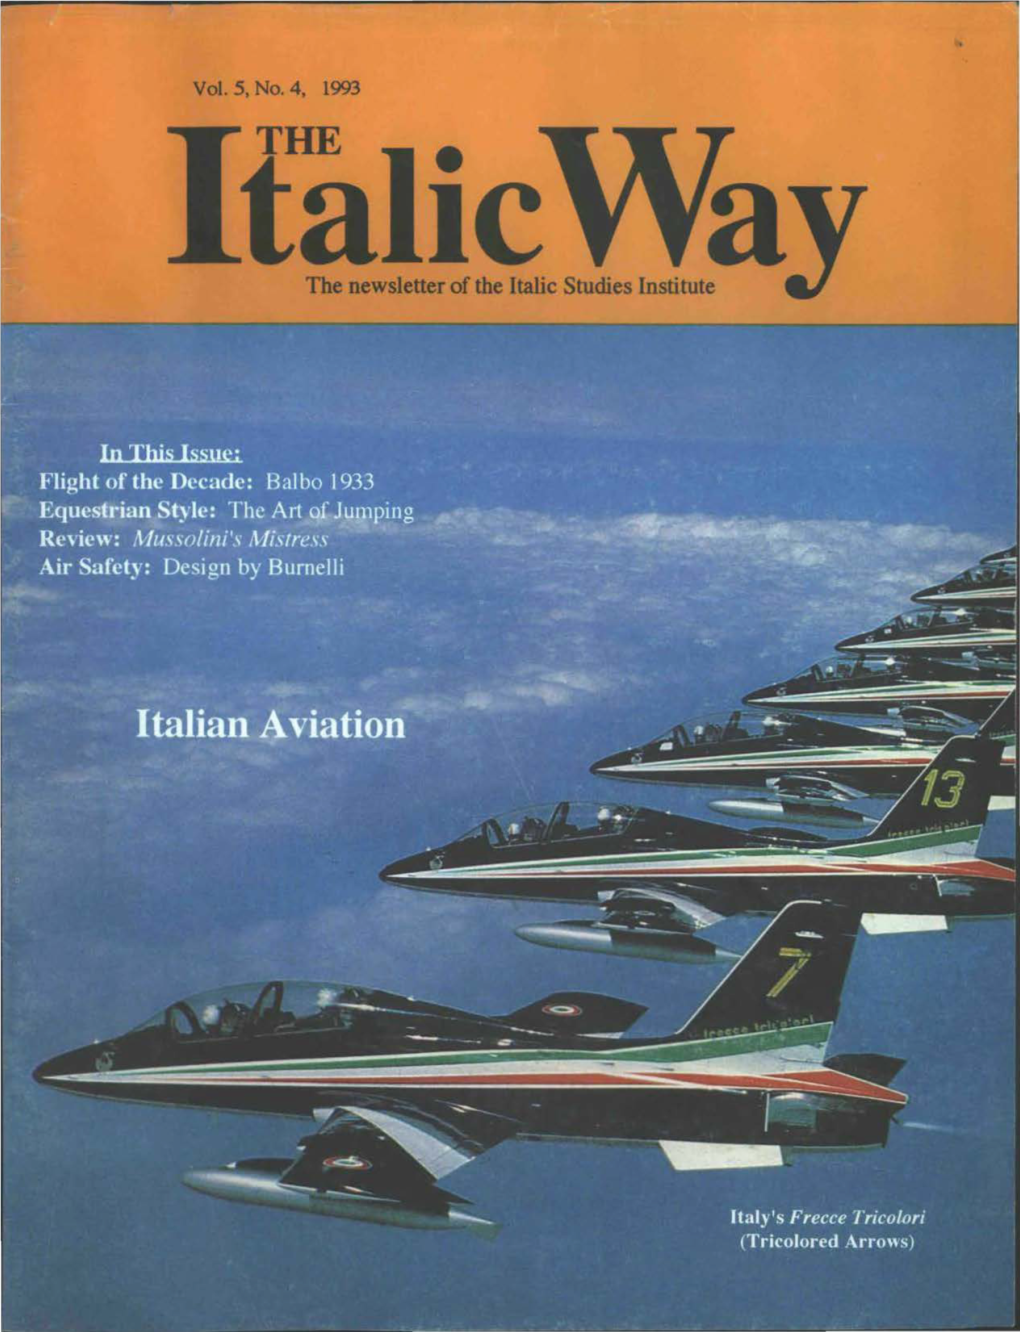 The Newsletter of the Italic Studies Institute the Italic Way Vol